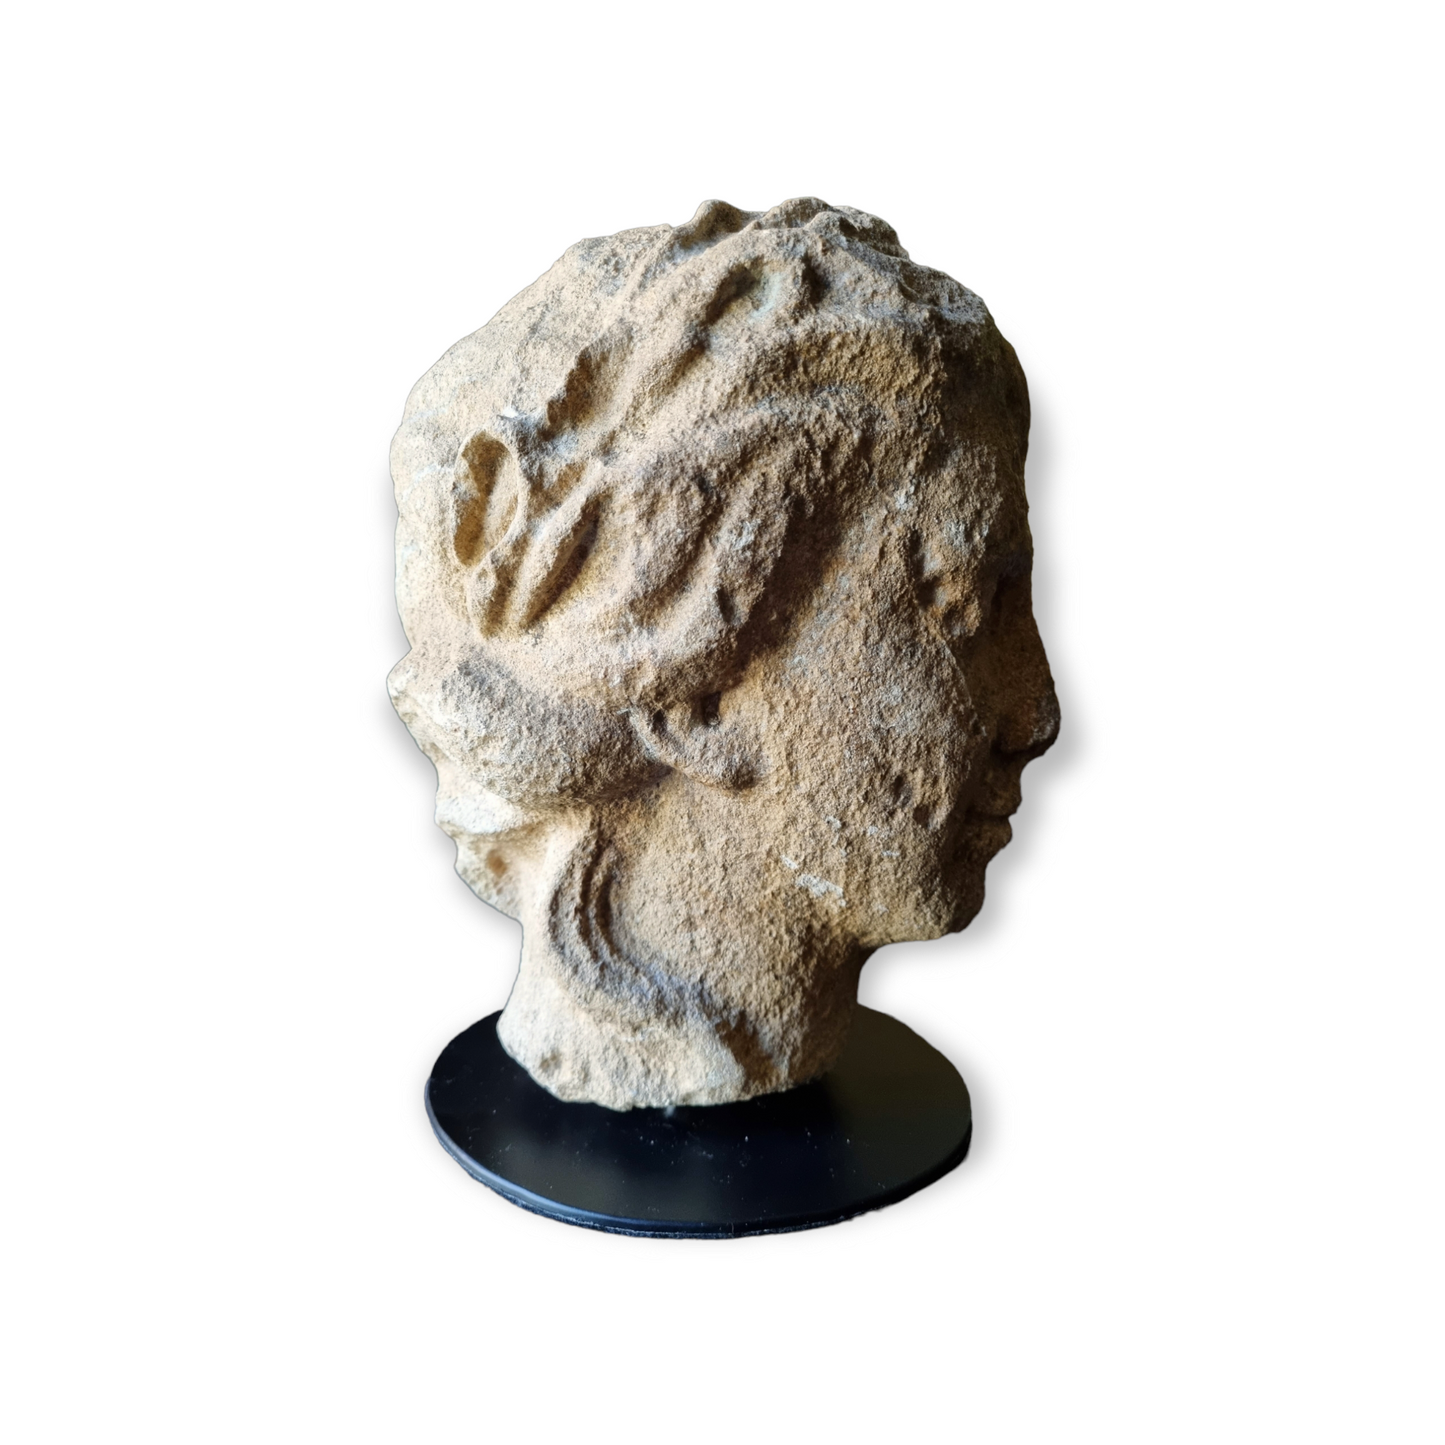 Grand Tour Roman Antiquity - 2nd Century AD - A Life-Size Antique Carved Stone Head of a Female Goddess, Possibly Venus